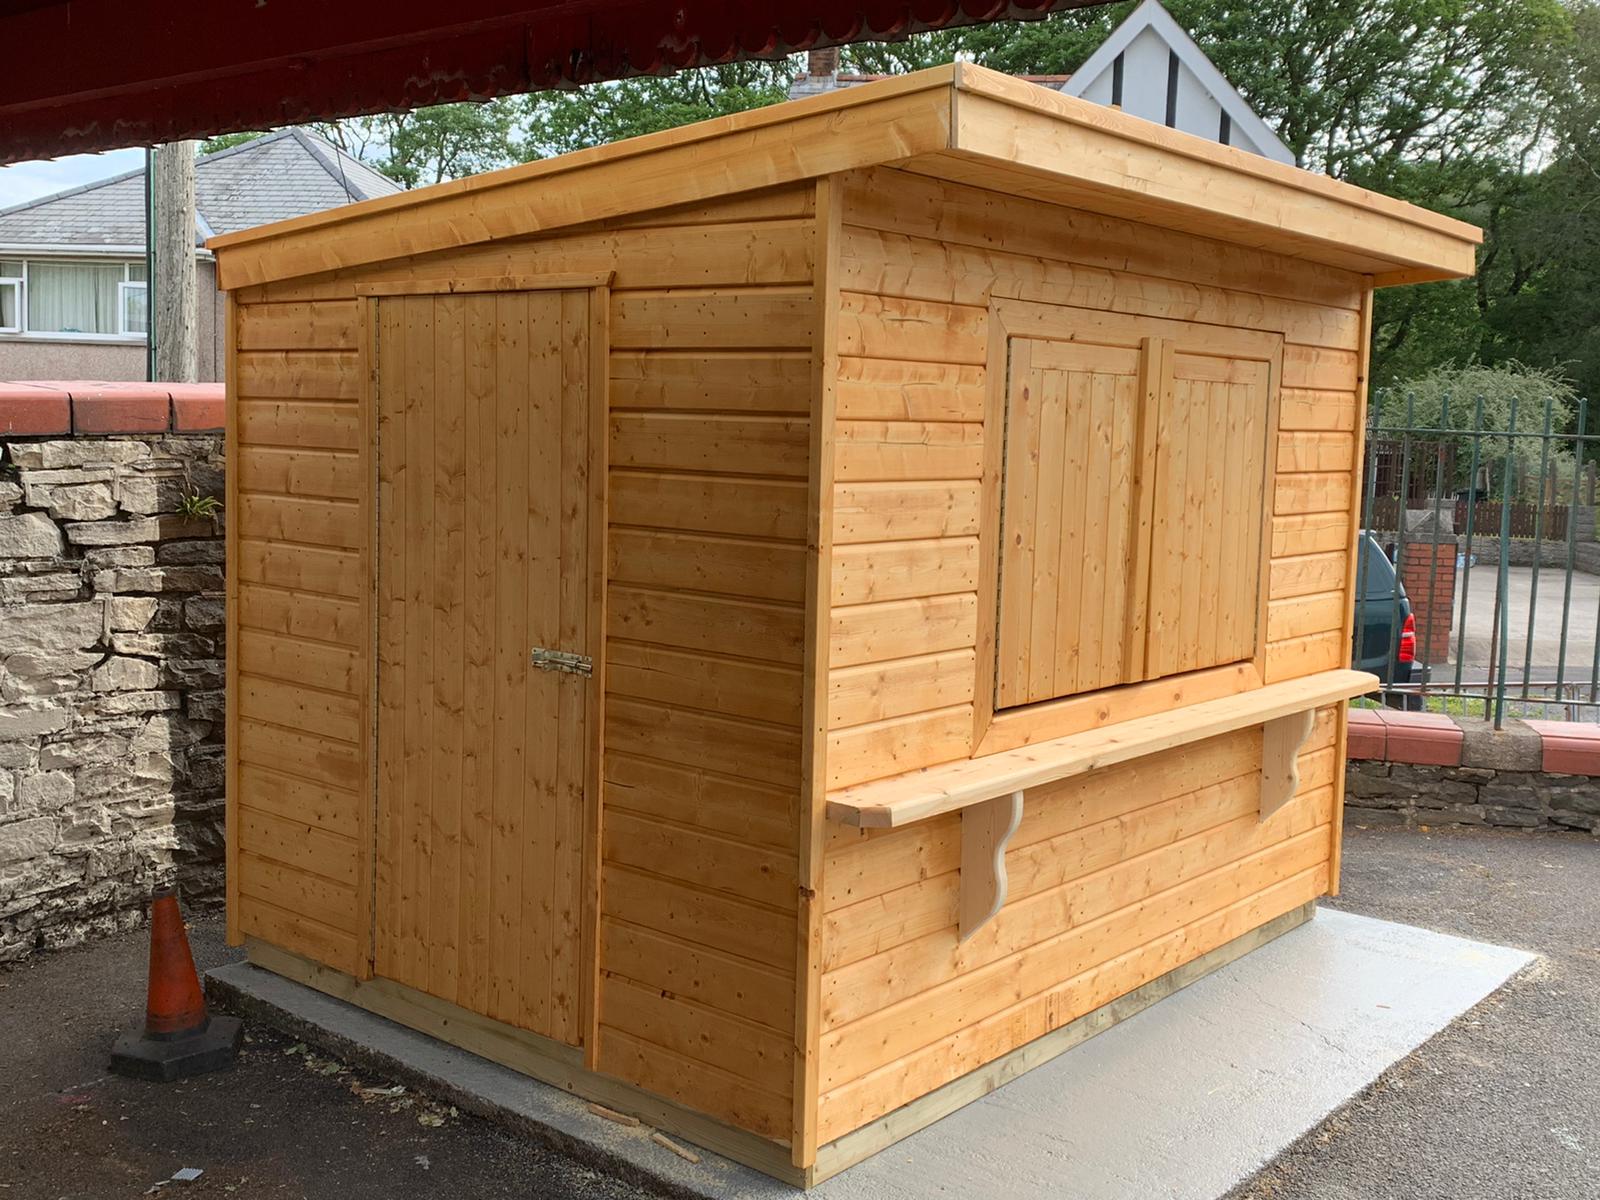 9' x 7' pent style snack shop. The style used in a school. Great for serving food and drinks to parents and children on sports days or other events.